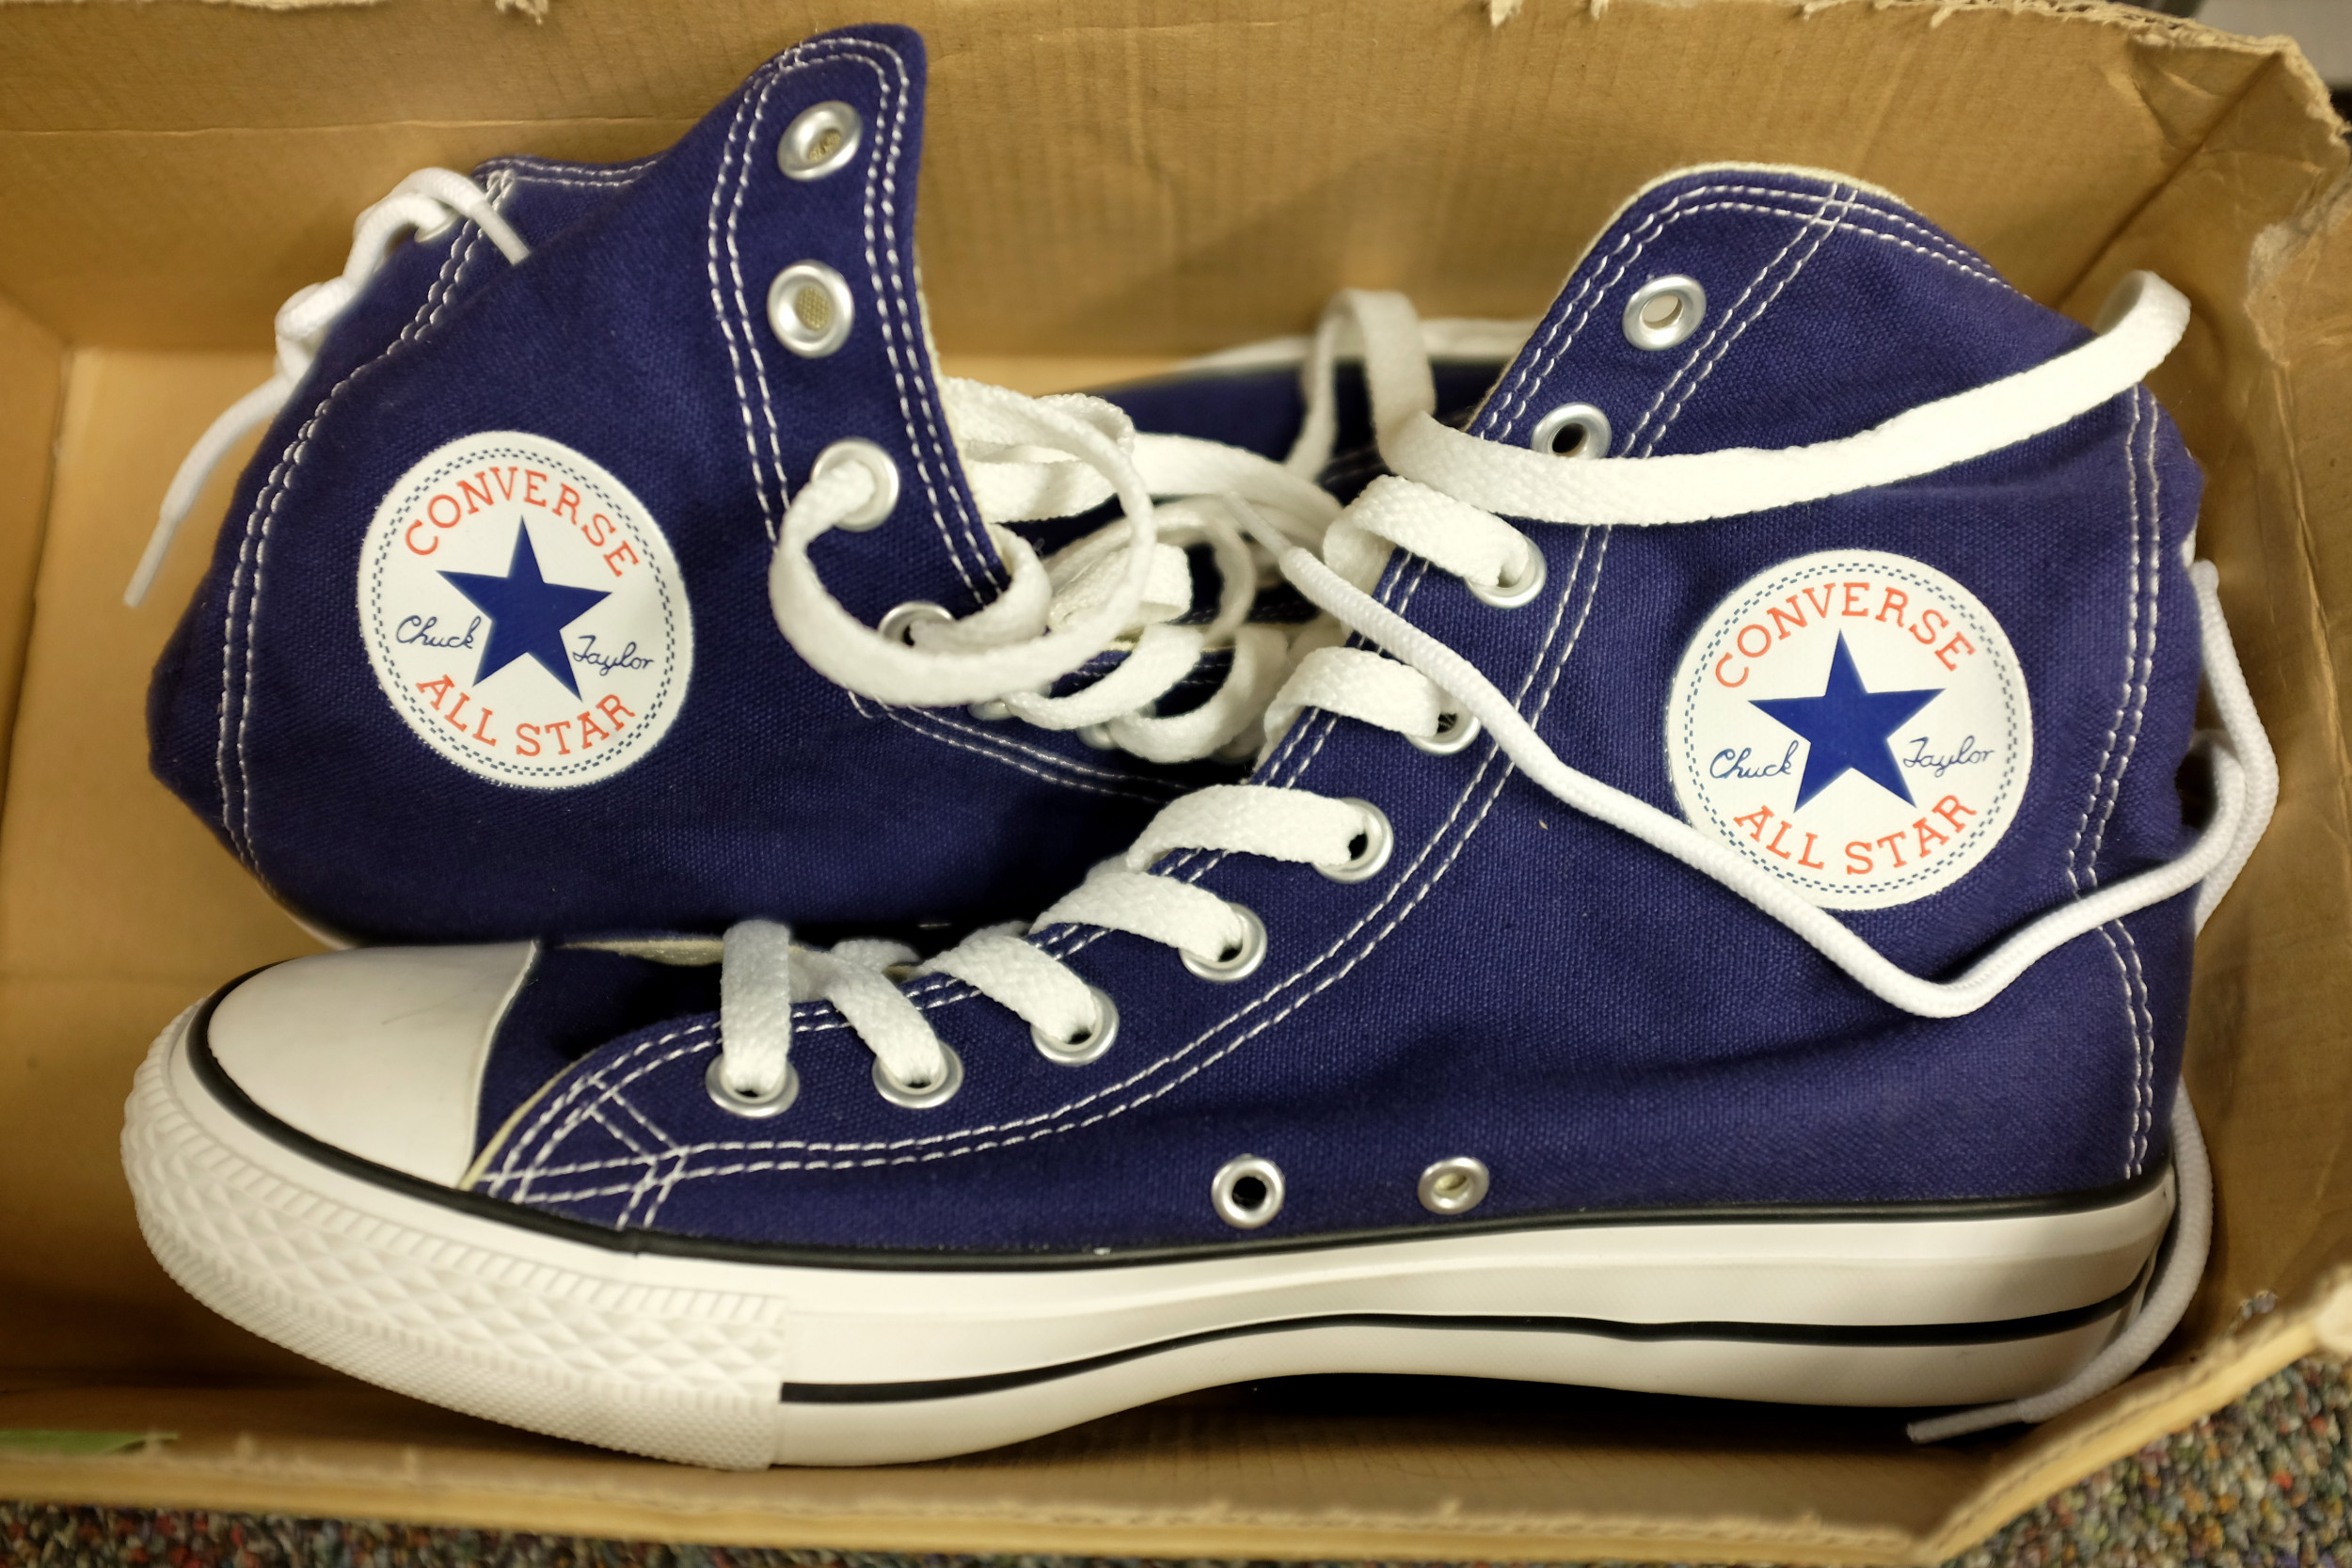 Converse All Star Porn - Shoe Store Employee Accused of Performing Lewd Acts on Customers' and  Co-Workers' Footwear